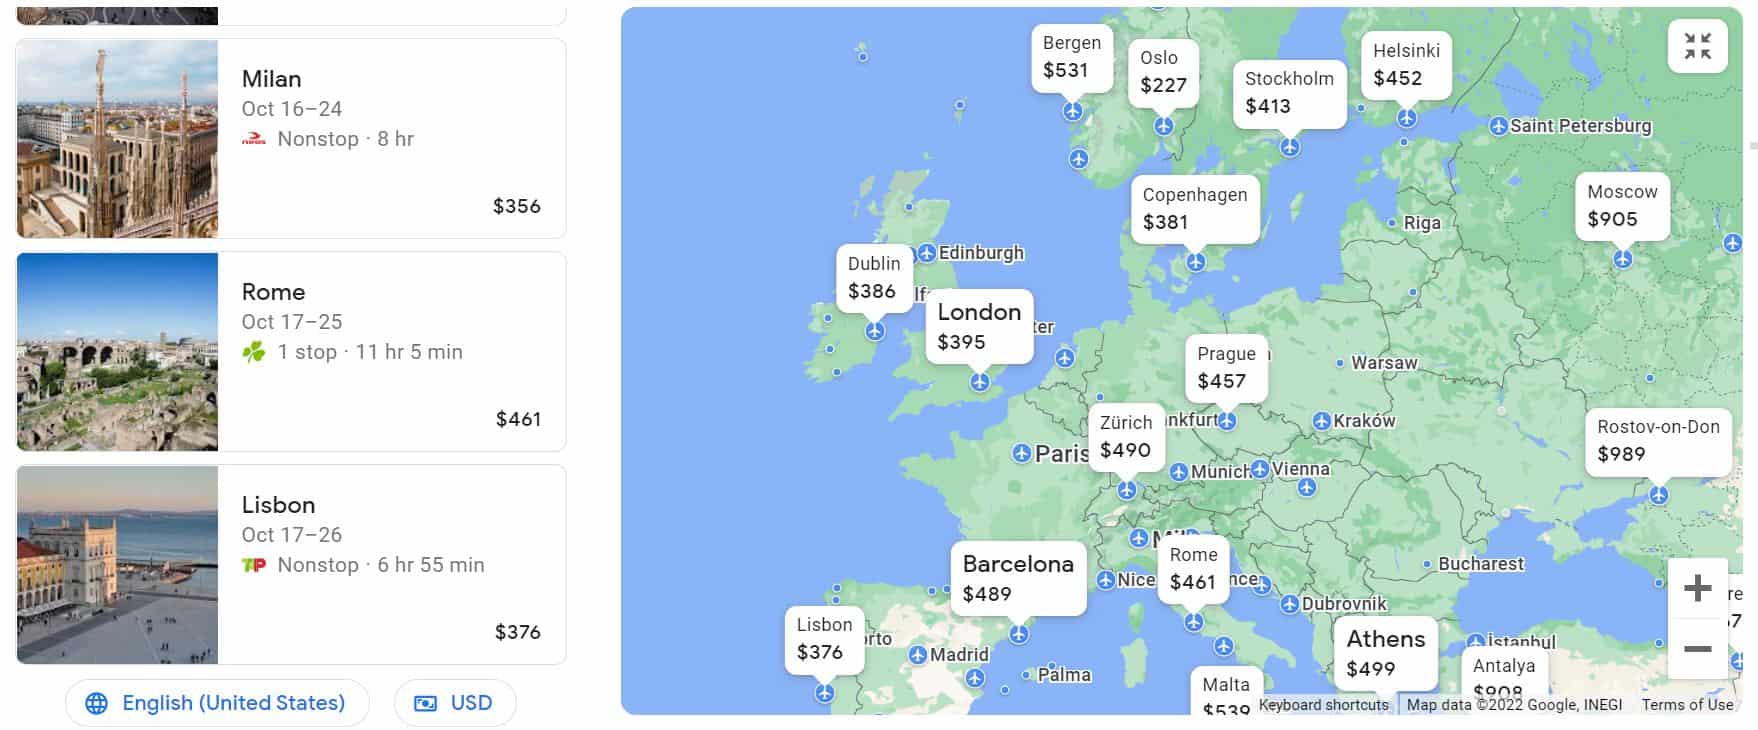 Screenshot of a flight search from Google Flights, showing map of Europe with flight prices.